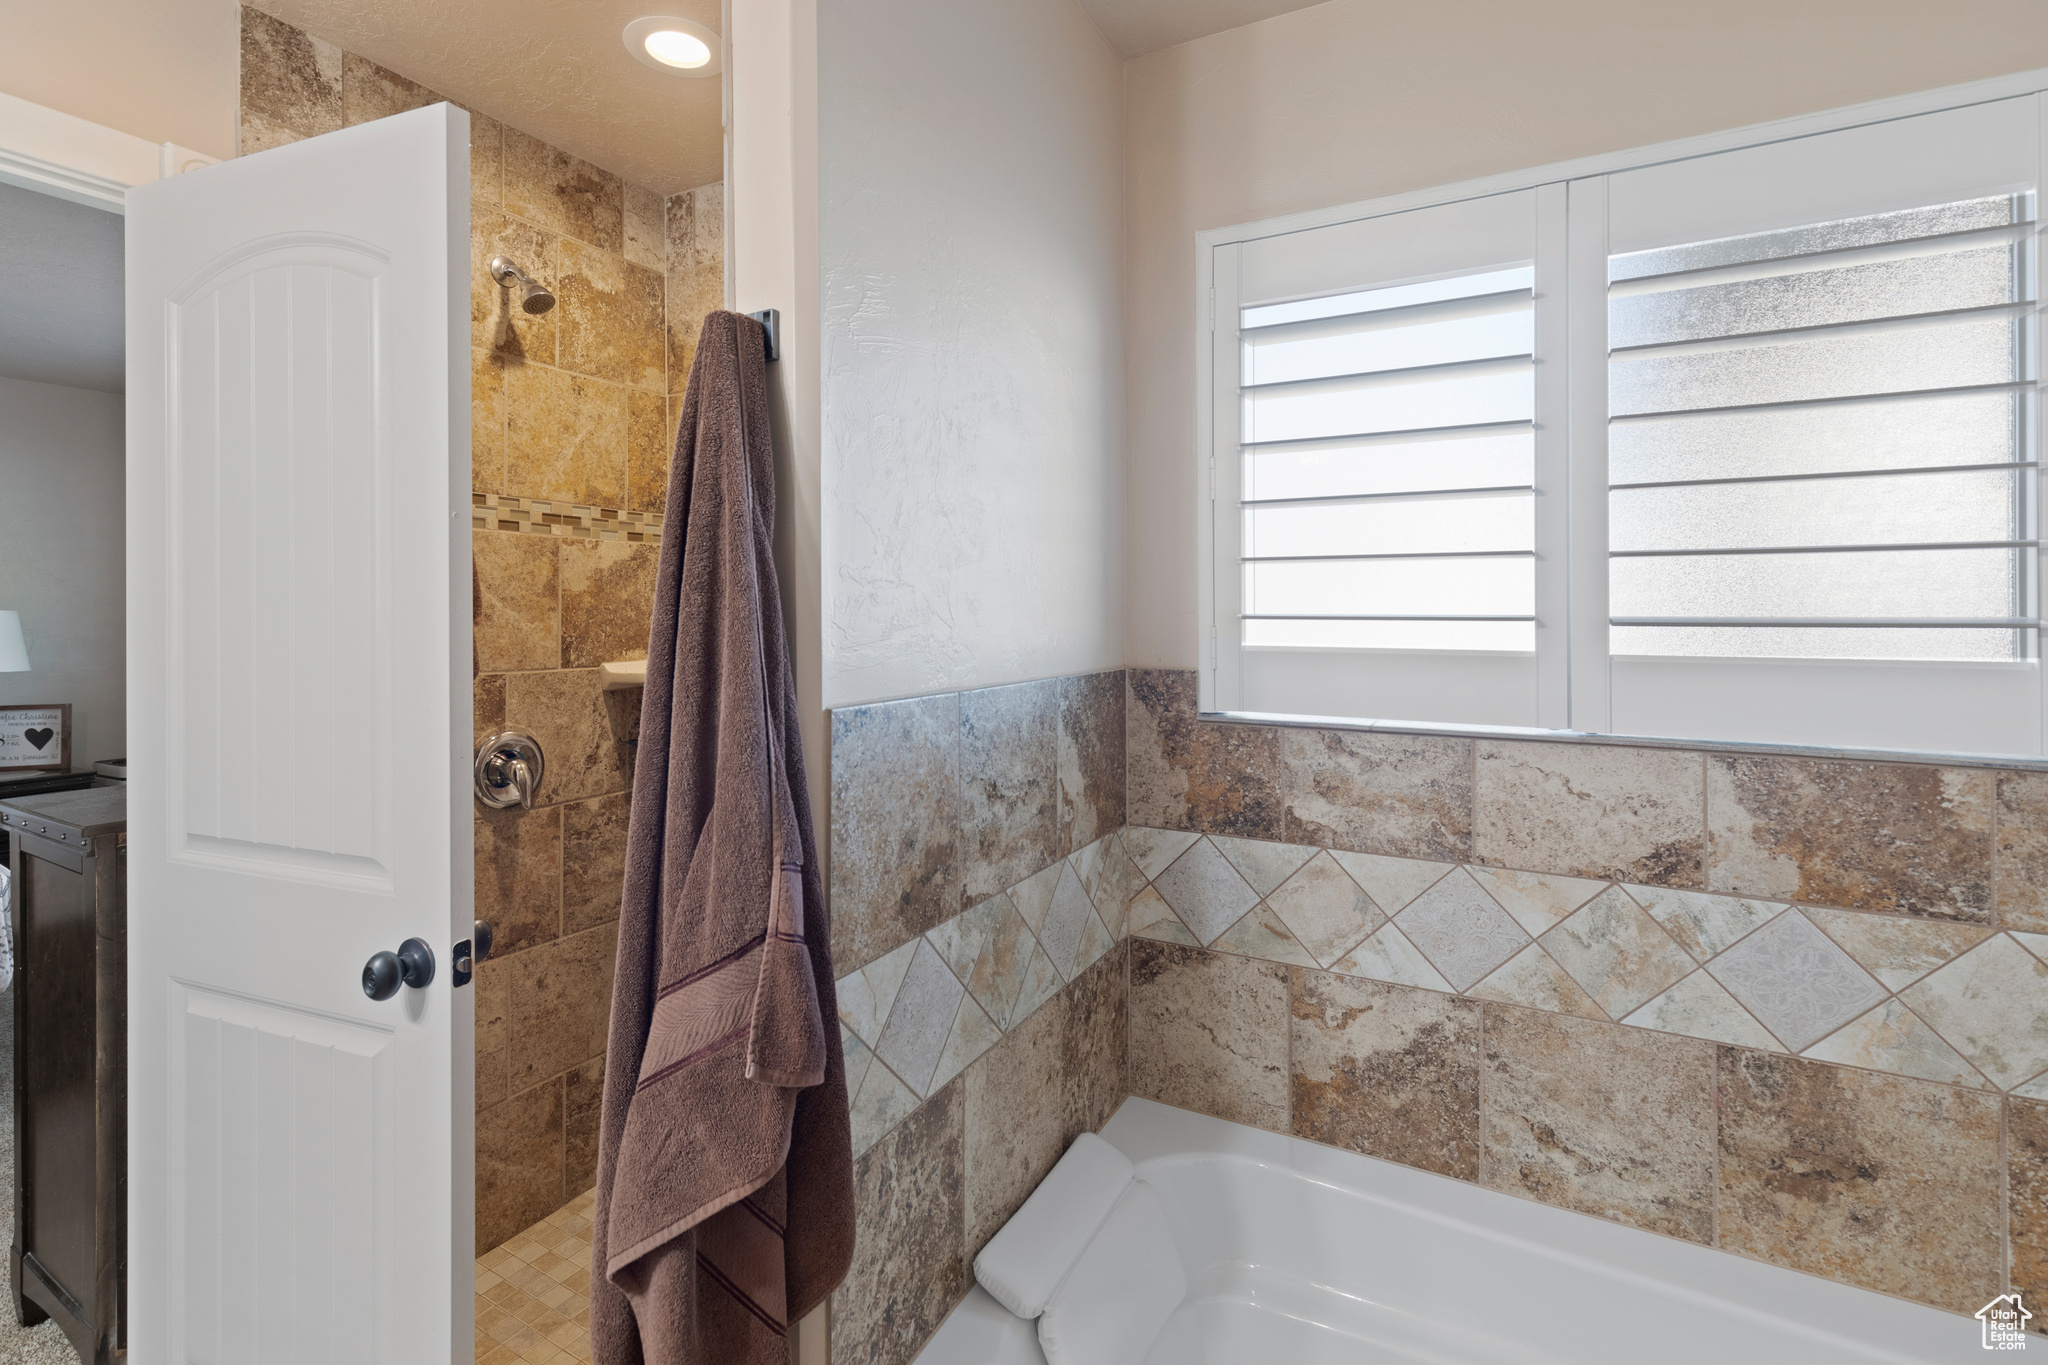 Bathroom with a healthy amount of sunlight and a washtub